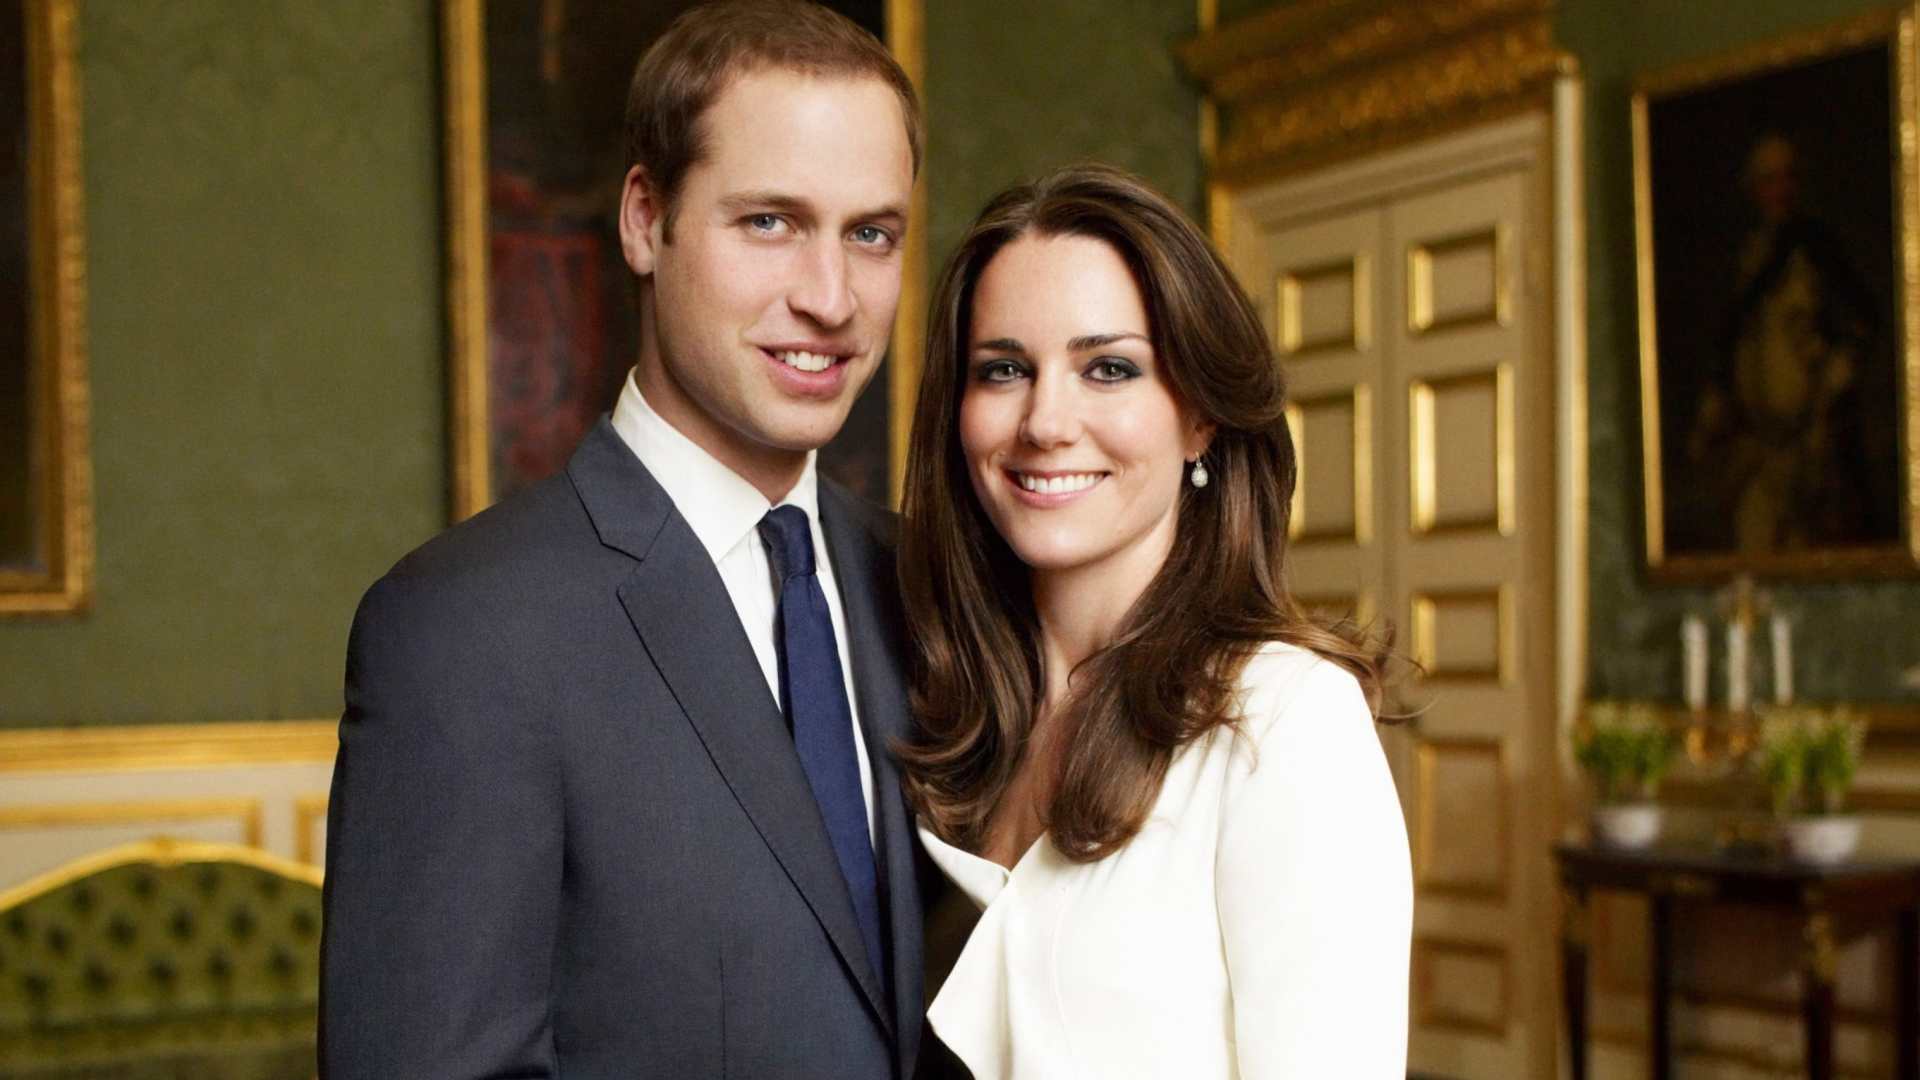 Prince William And Kate Middleton wallpaper 1920x1080